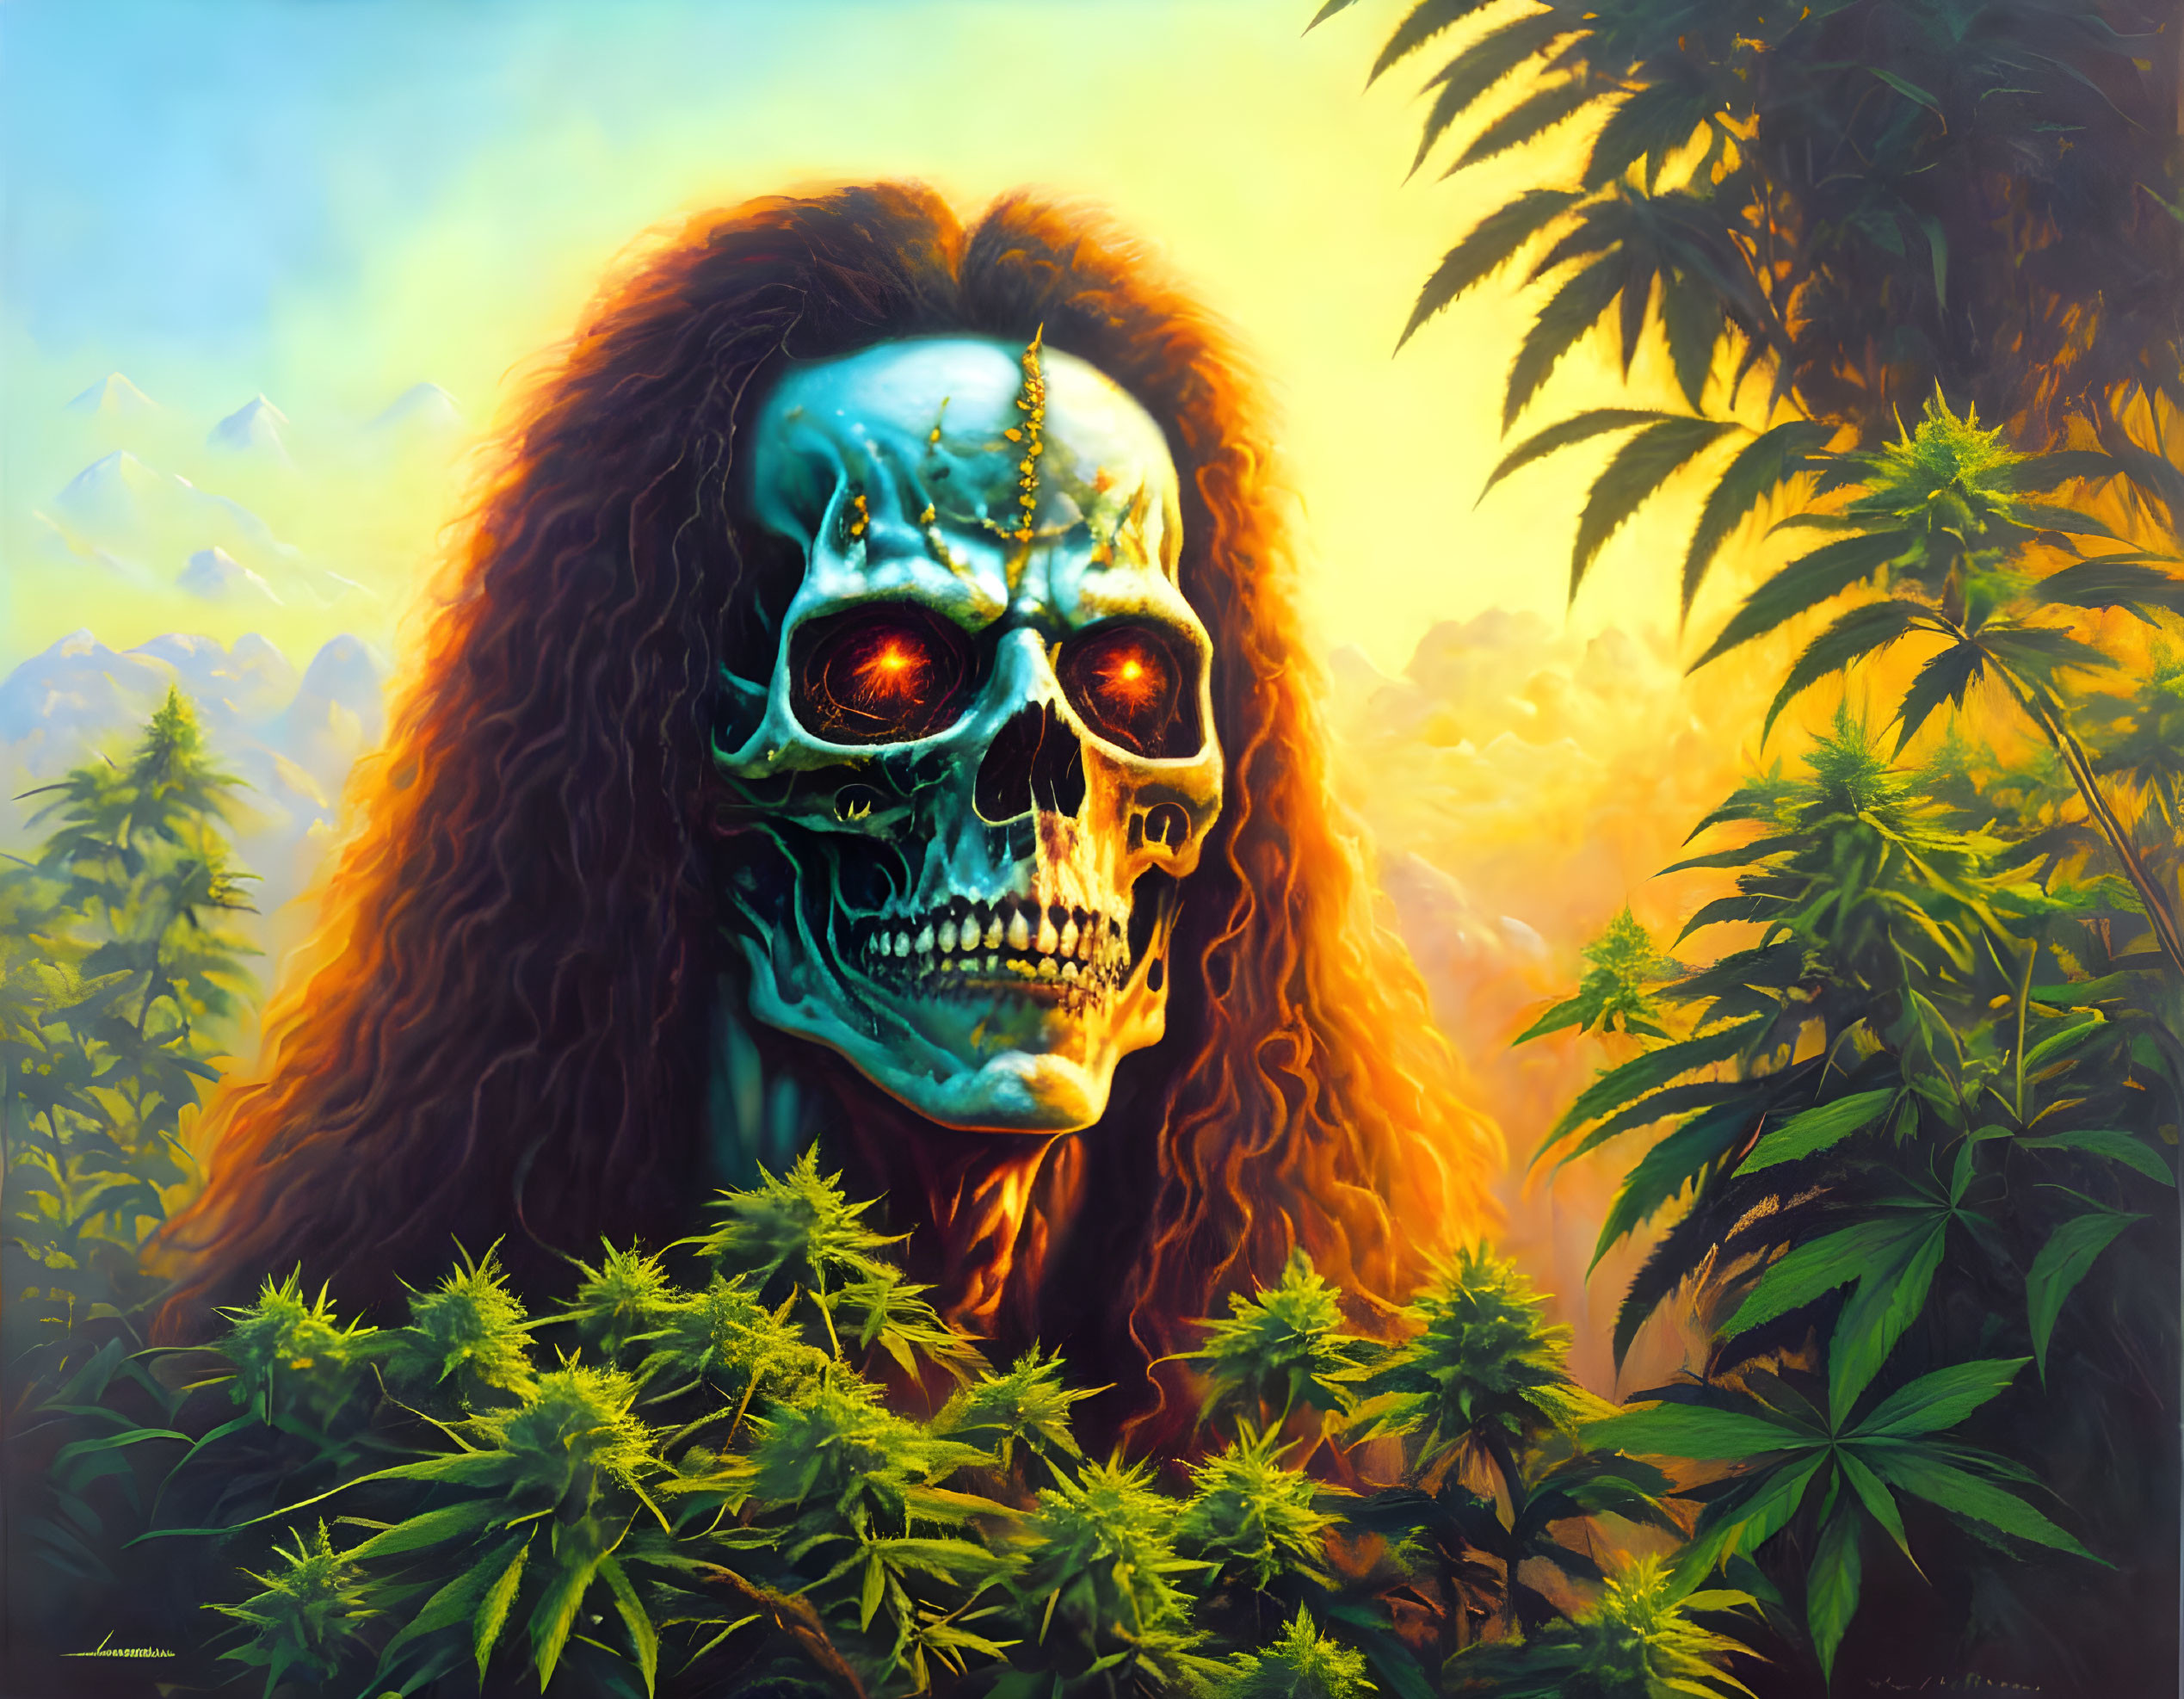 Colorful human skull painting with long hair and green face paint in cannabis plant sunset scene